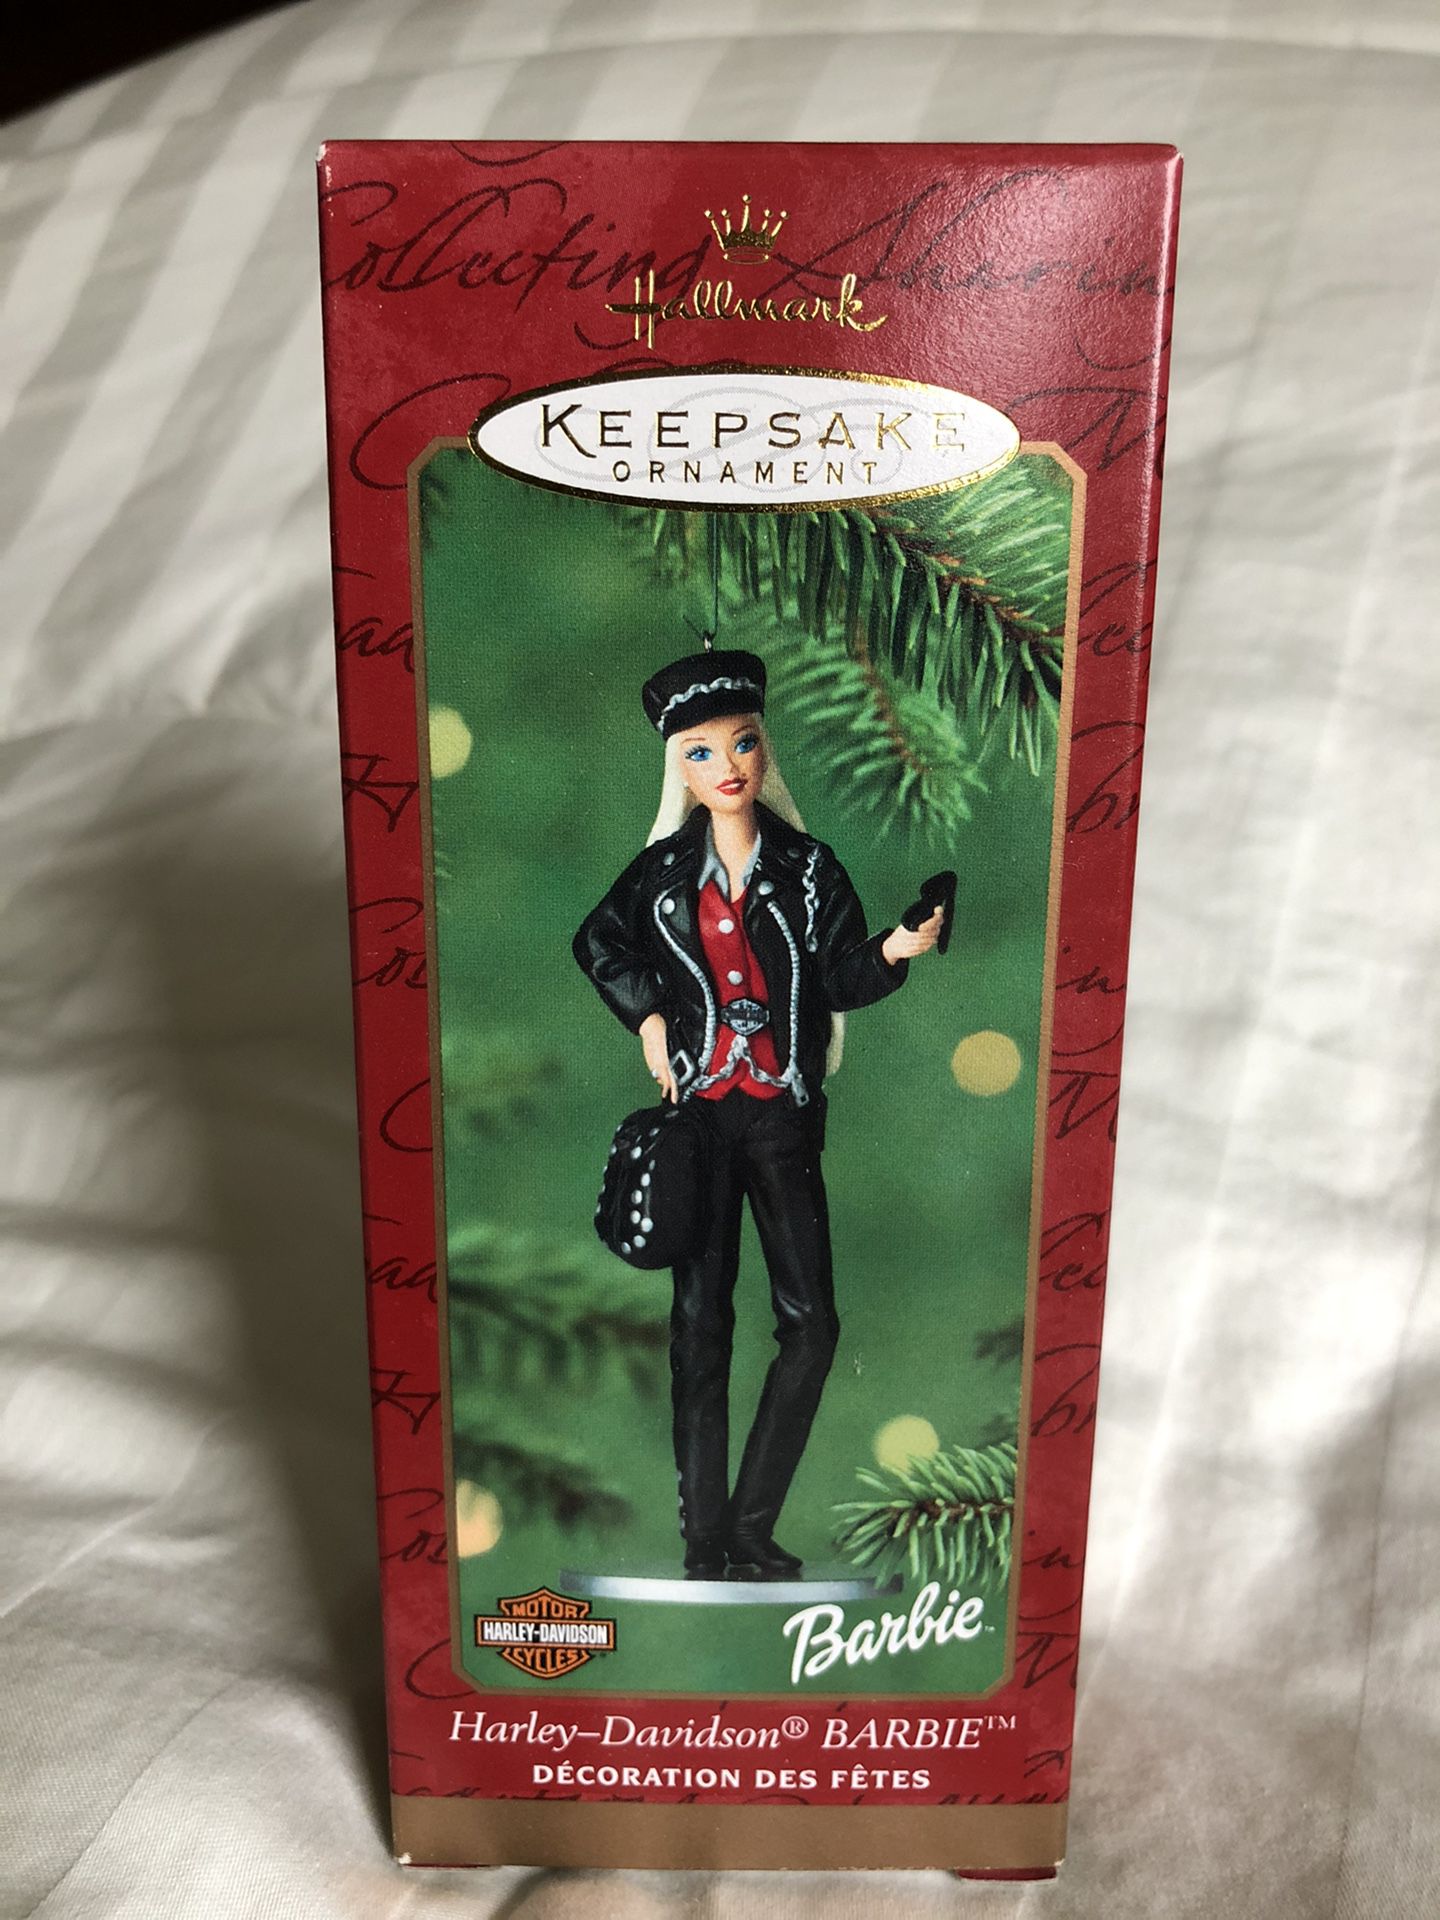 Harley-Davidson BARBIE Christmas Ornament. MINT 6”x2.5”x1.5” Box. 20 Years Old - Never Opened.